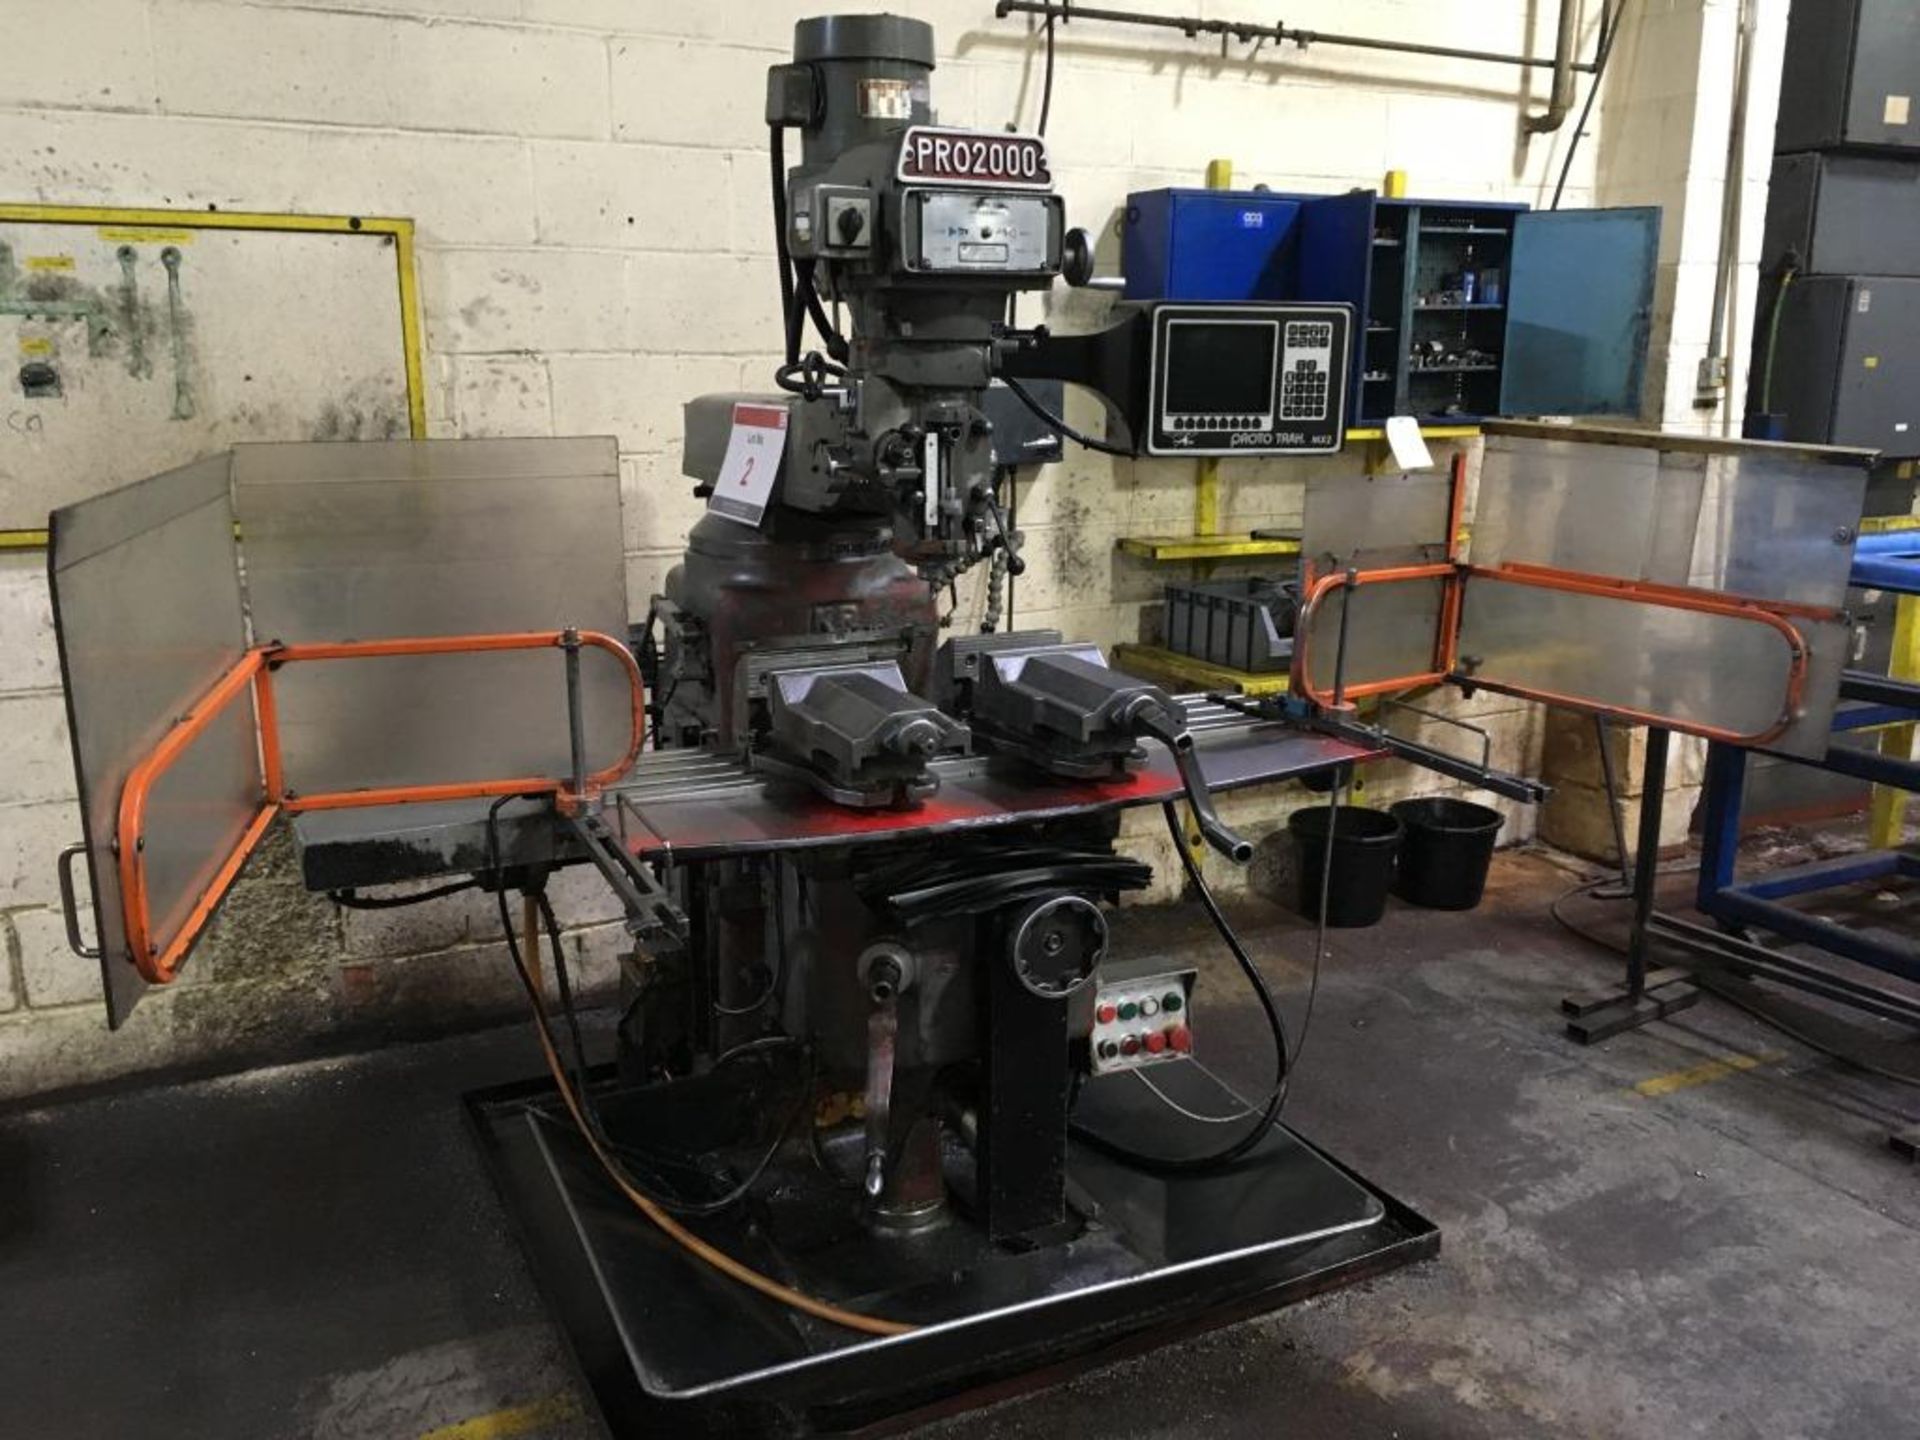 King Rich Industries Co turret milling machine, KR - V2000 Pro 2000, Serial No. 7176, with Proto